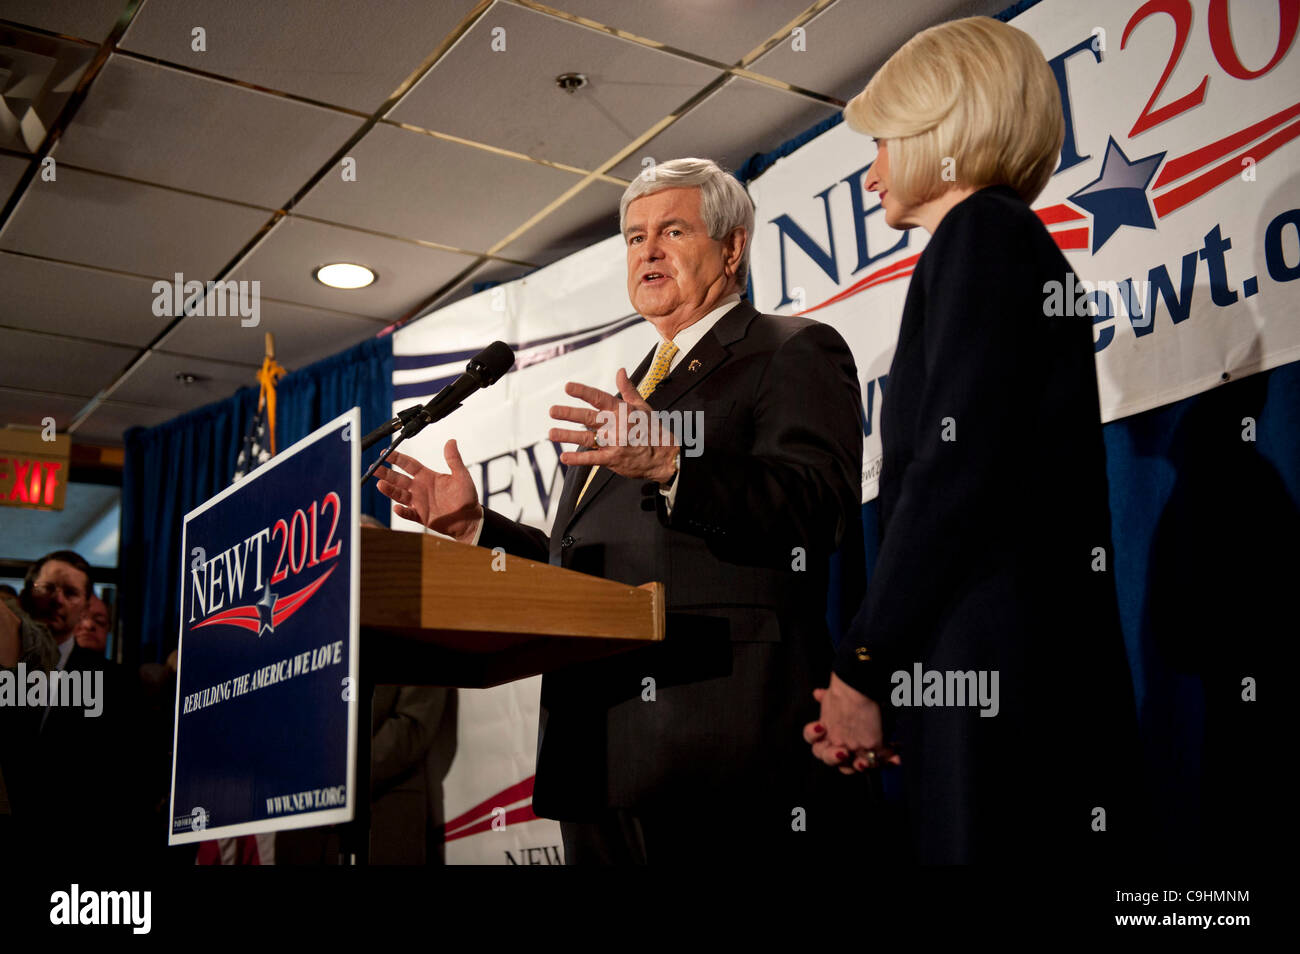 Manchester, NH, Unites States - 1/8/12 -   Former Speaker of the House Newt Gingrich, with wife Callista, right, speaks during a campaign stop in Manchester, NH January 8, 2012, as he campaigns for the Republican nomination for President prior to the New Hampshire Primary.     (Photo by Gordon M. Gr Stock Photo